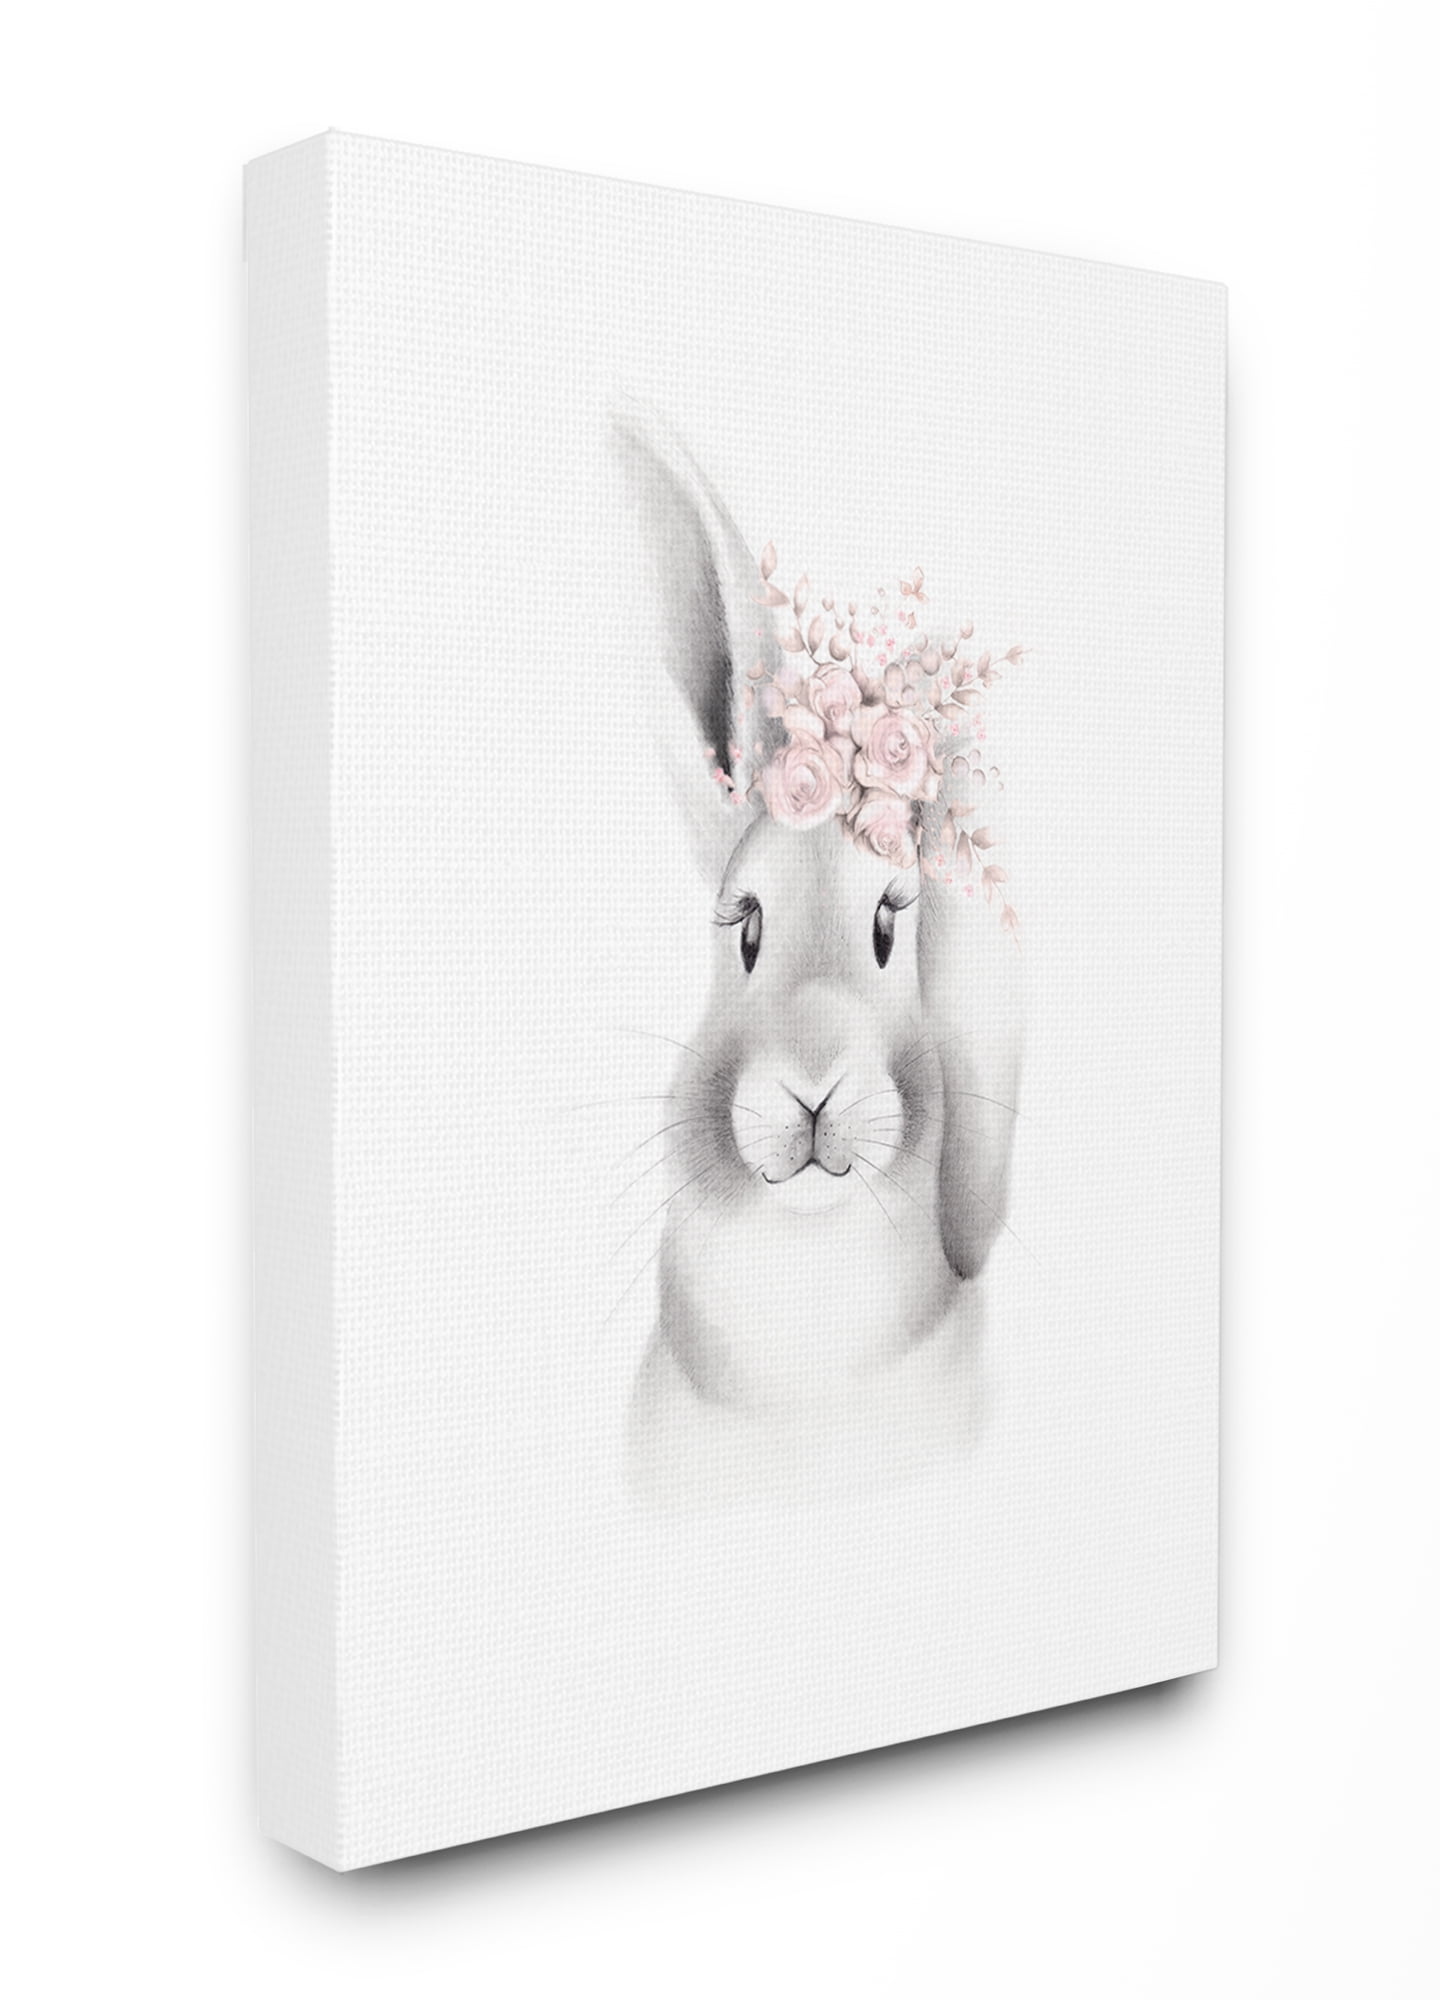 Design by Leah Straatsma Black Framed Wall Art 16 x 20 White Stupell Industries Baby Elephant with Pink Bubble Gum Safari Animal